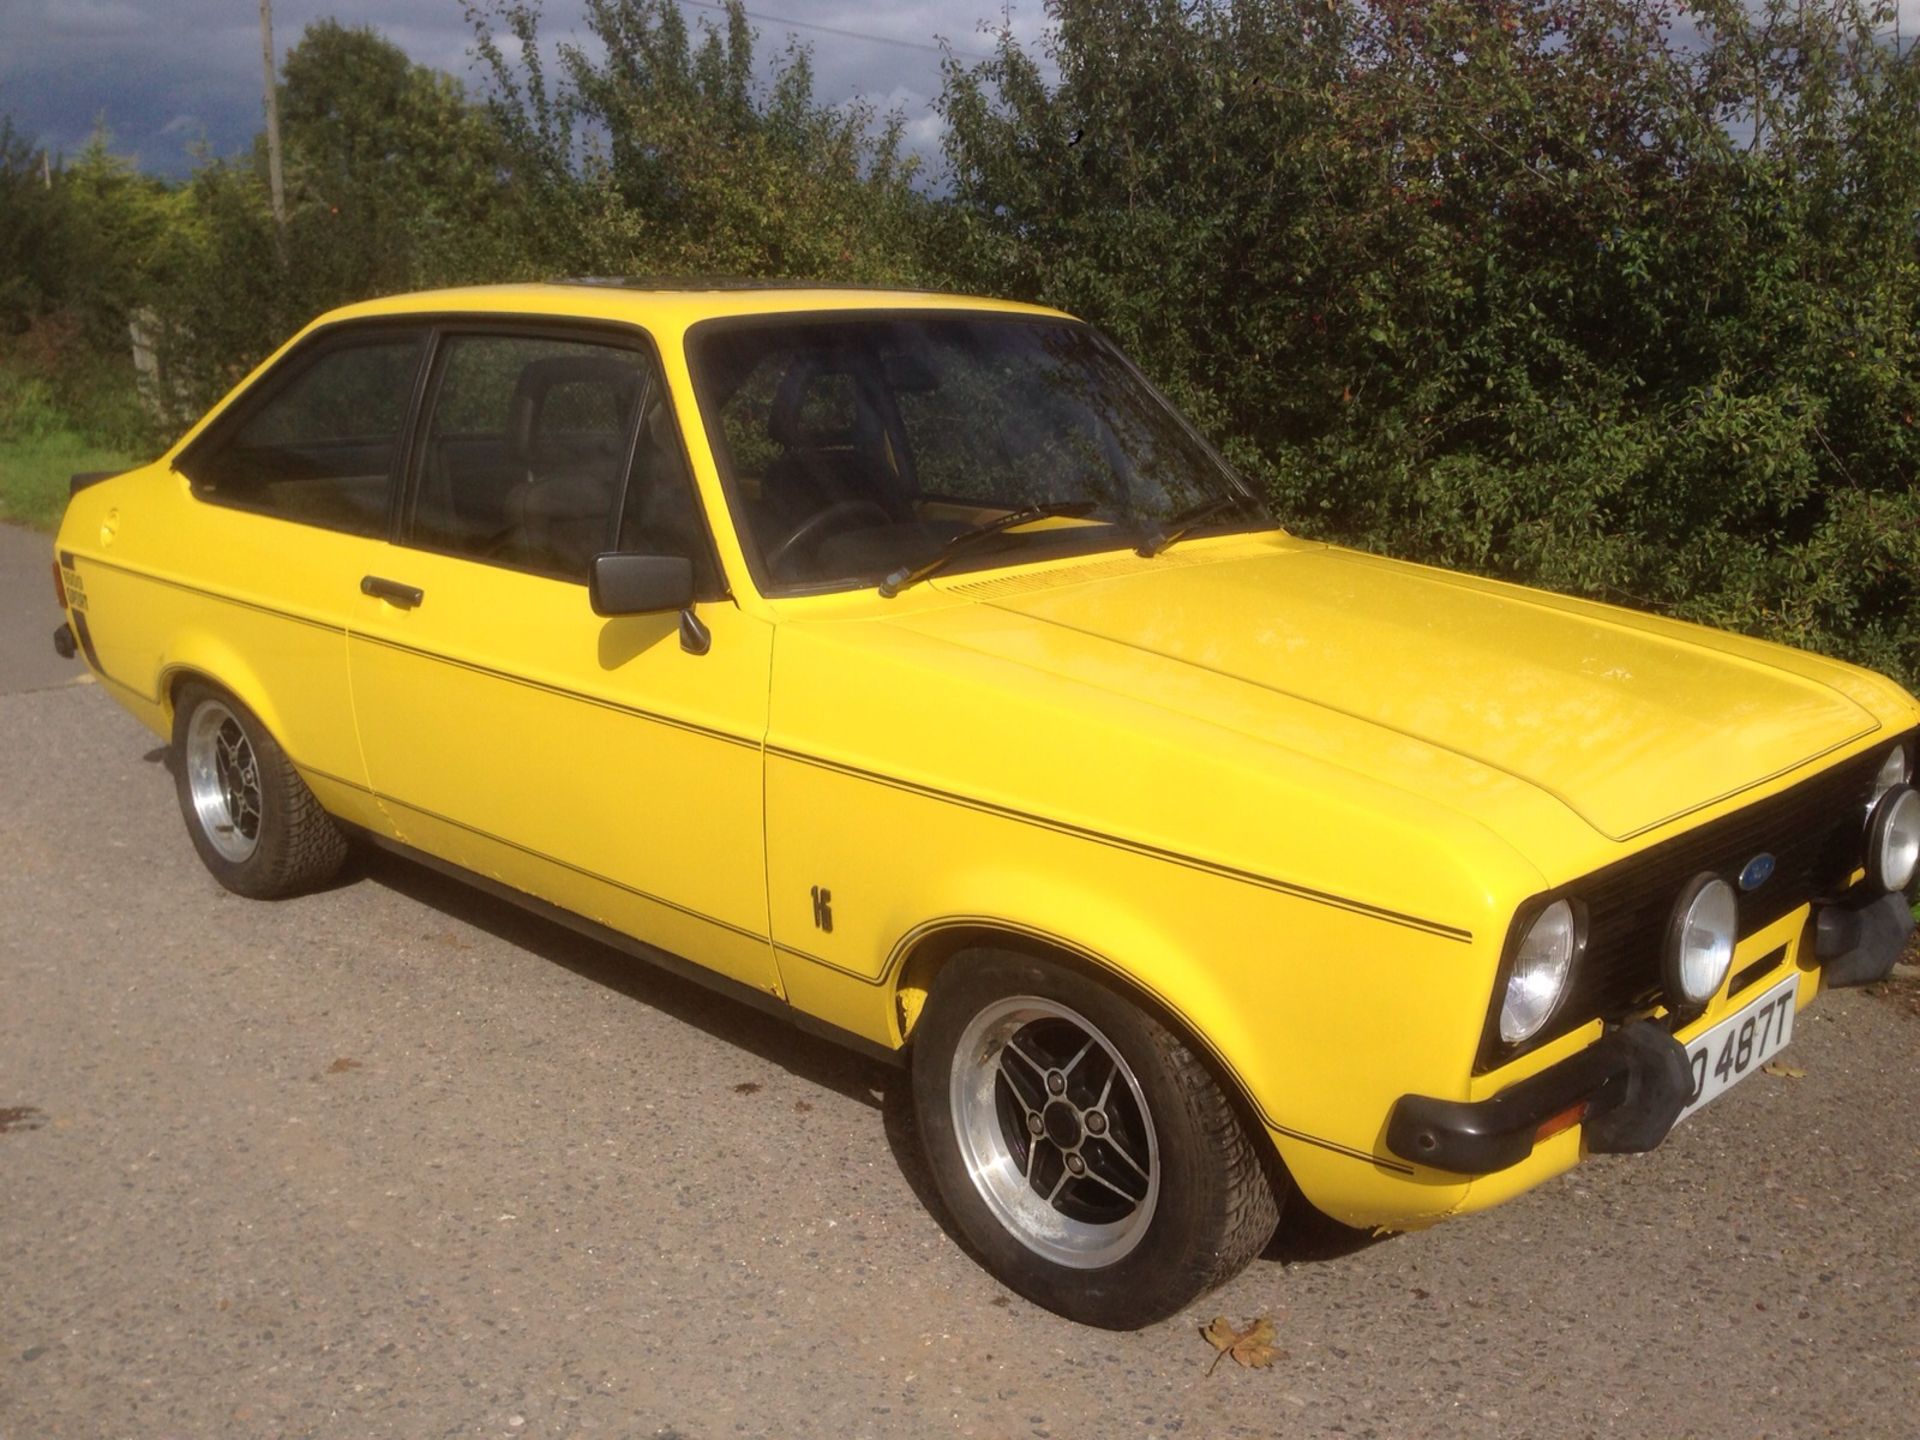 1979/T Ford Escort mk2 1600 Sport - in Signal yellow -  UK car  (545 miles) since rebuild - Image 7 of 54